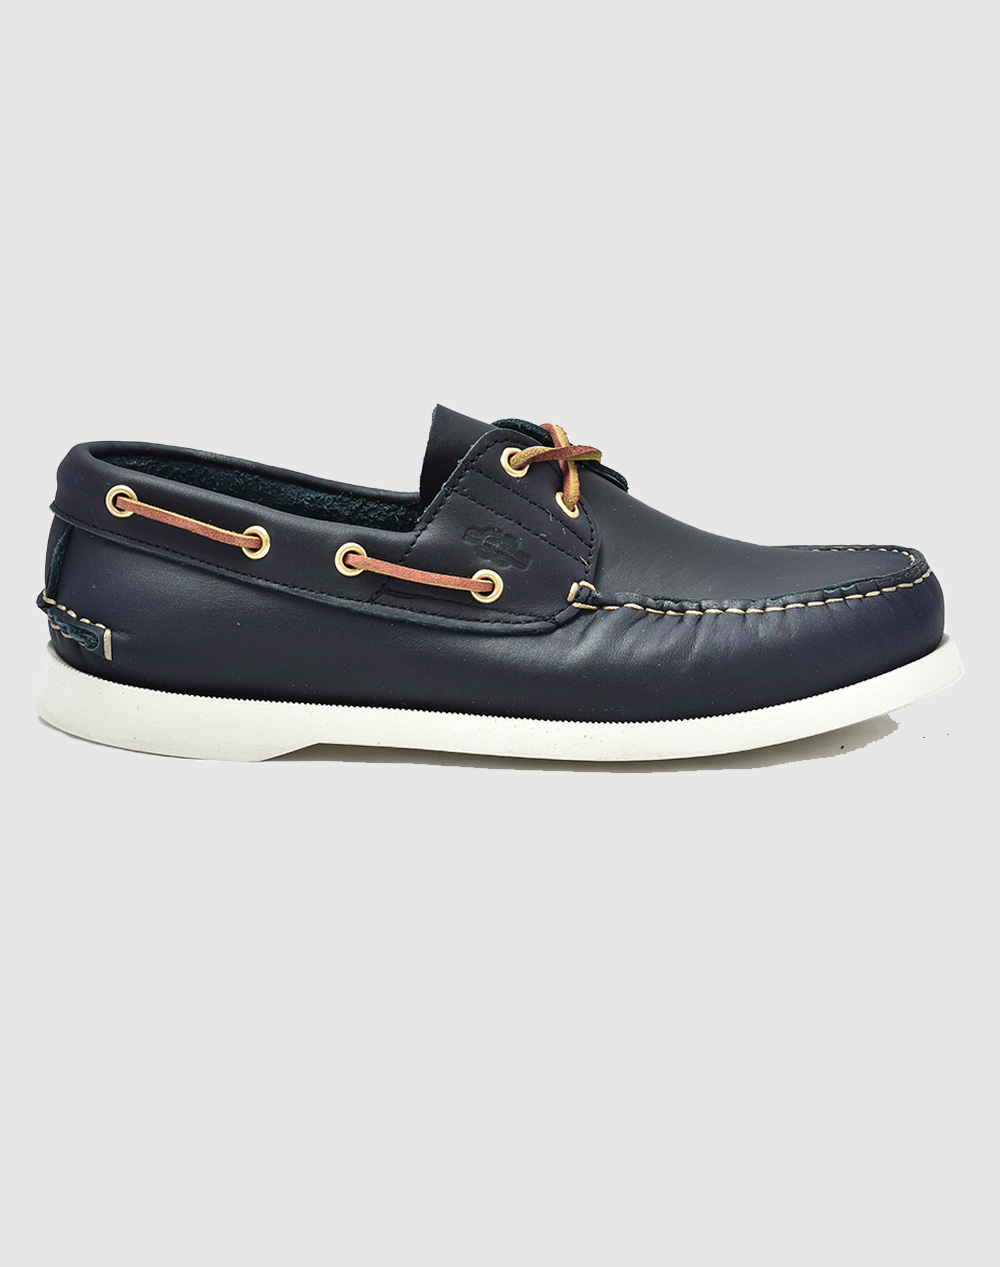 CHICAGO SHOES 124-5.0947-820-NAVY/W NavyBlue